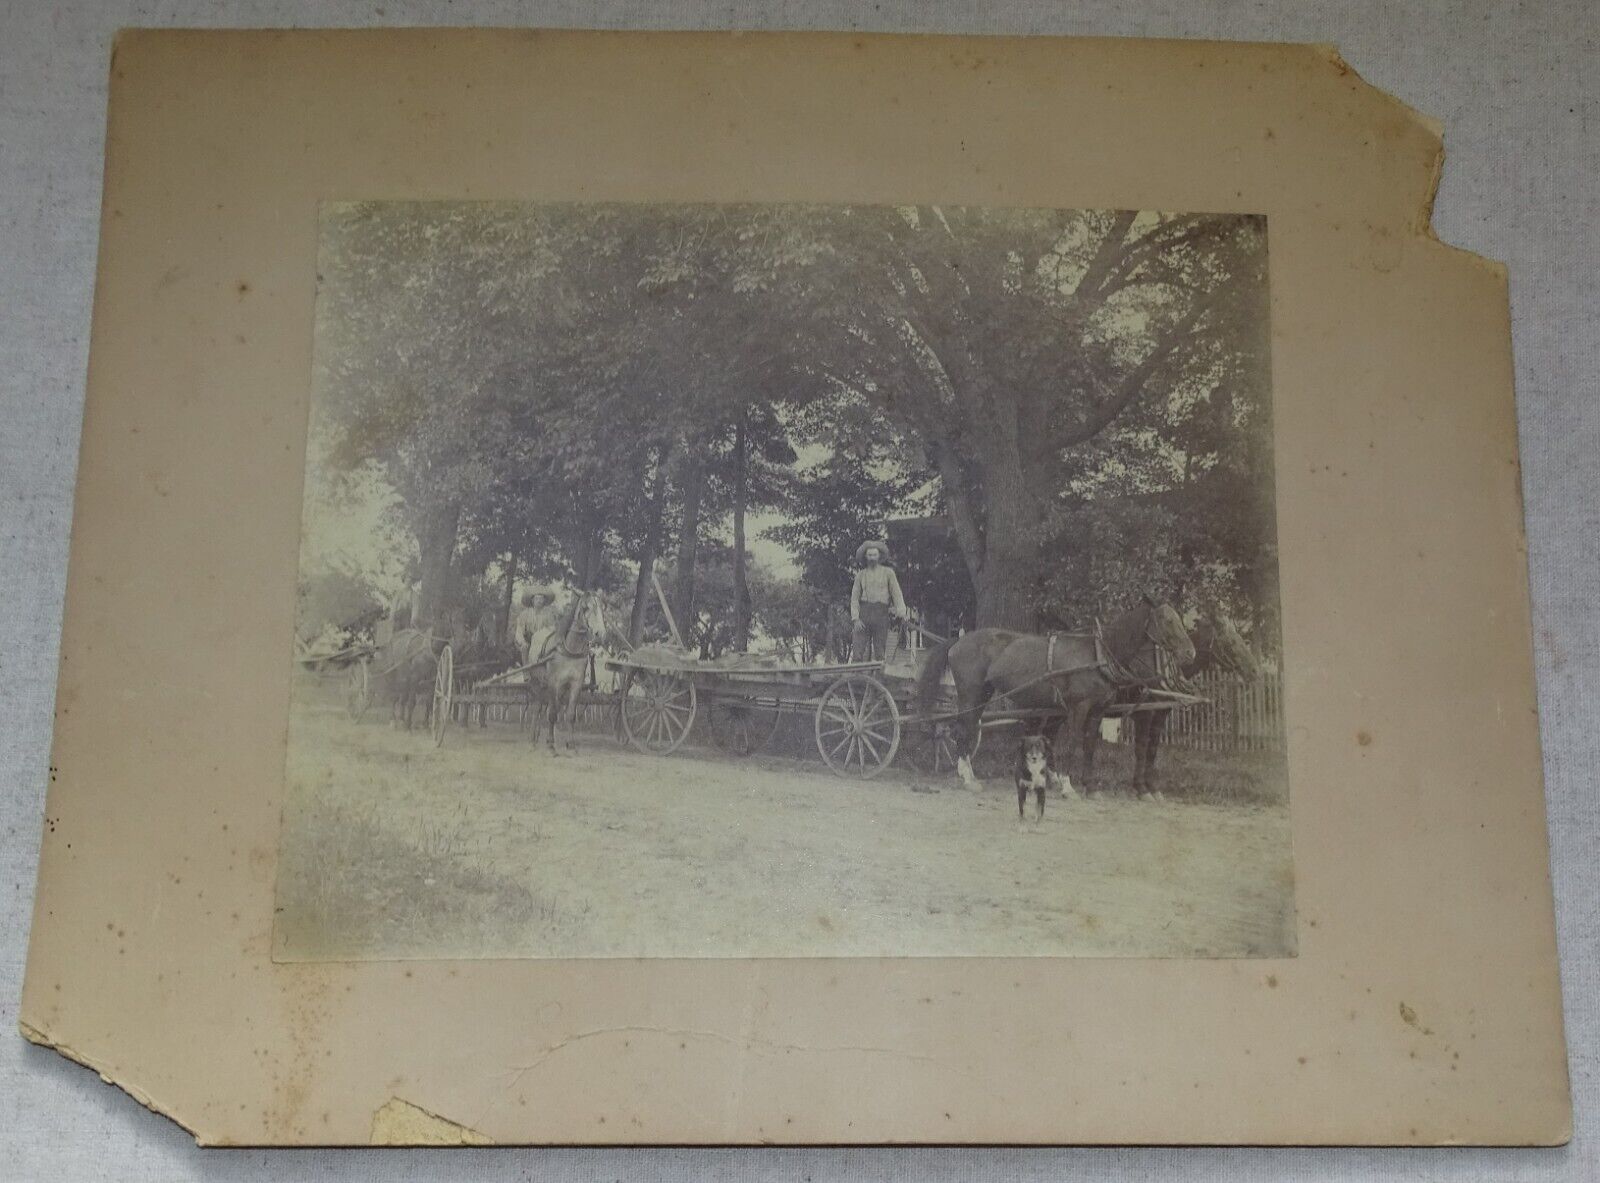 Antique Photograph Joseph L. Weed Farm, East Line Saratoga County N.Y. Haying